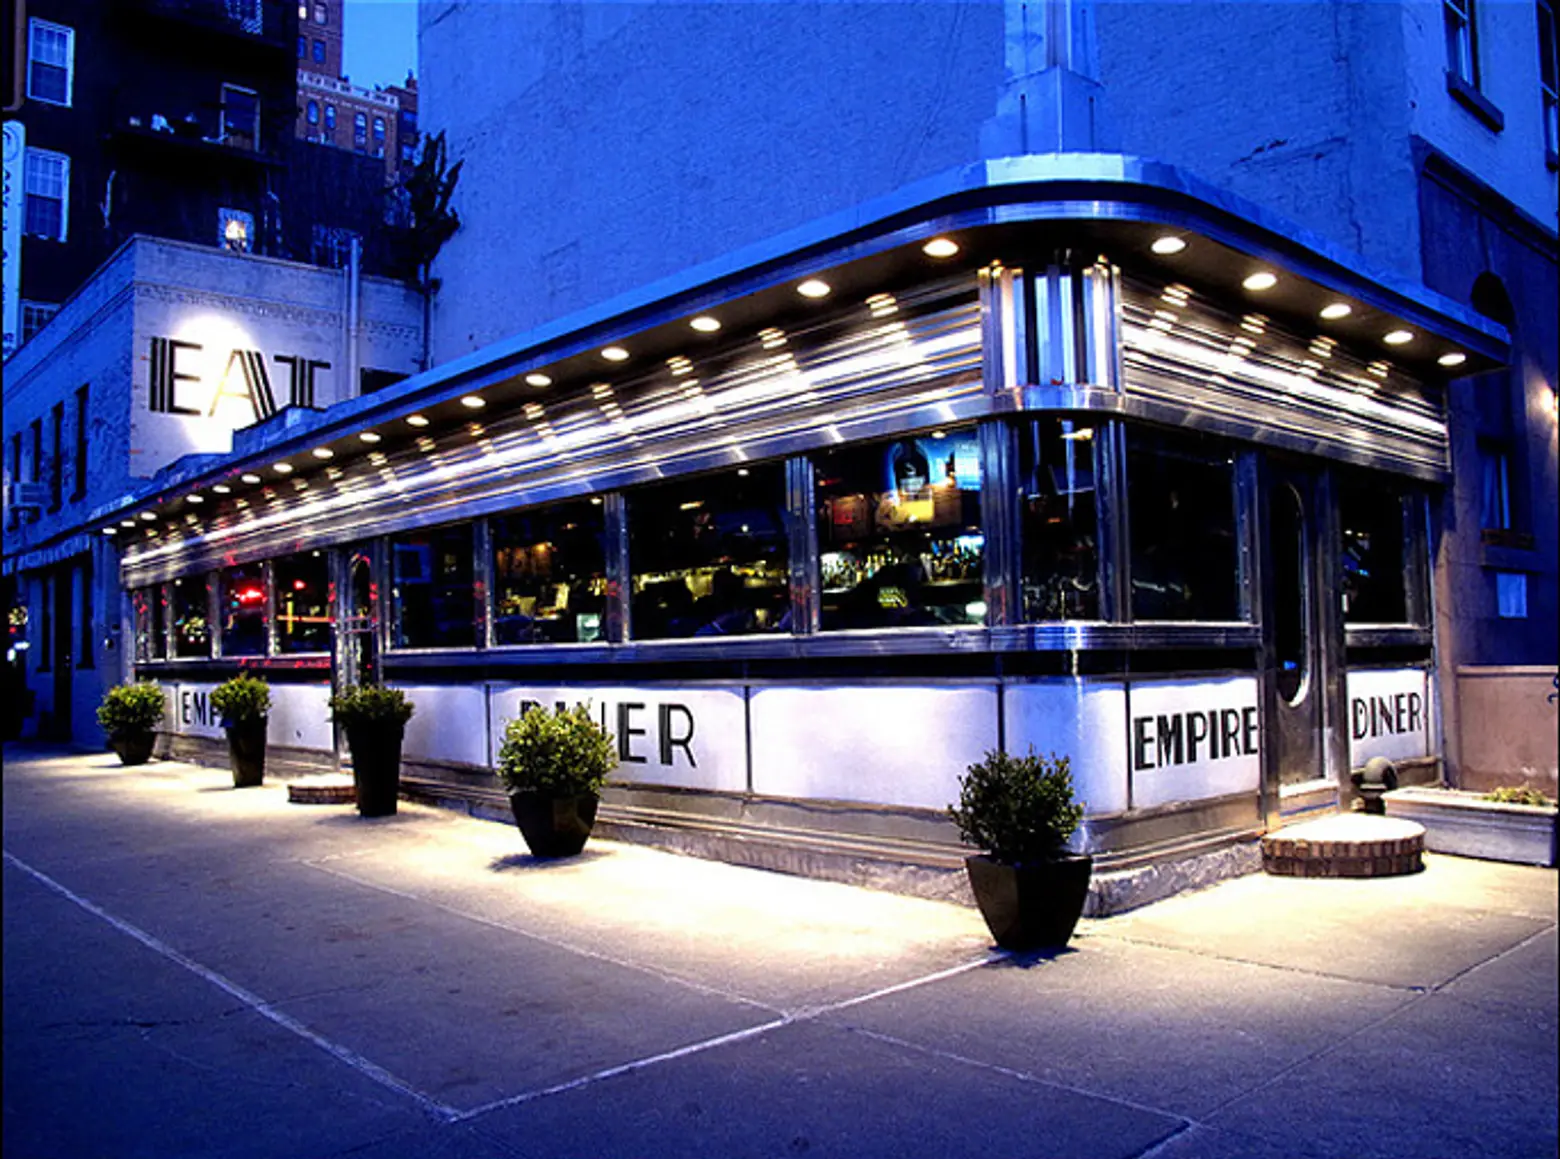 Neon, Metal, and Patty Melts: A Look at Classic New York City Diner Design